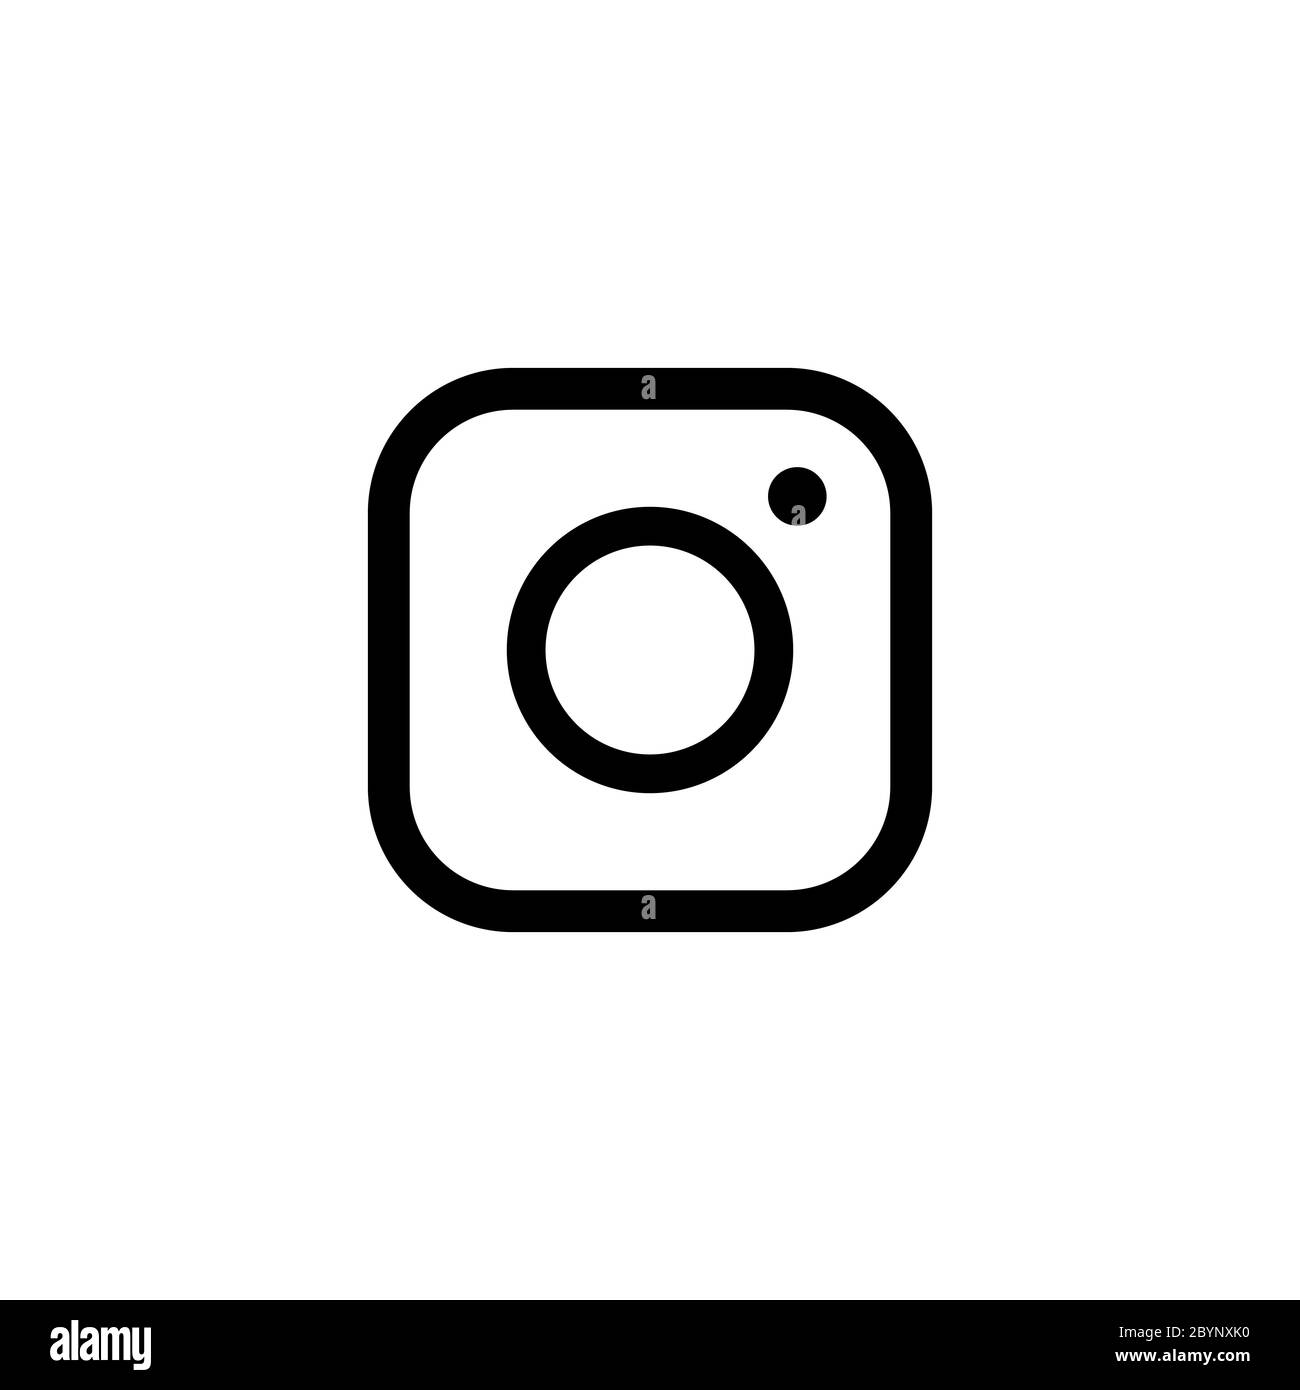 Camera icon in social media instagram concept on isolated white background. EPS 10 vector. Stock Vector